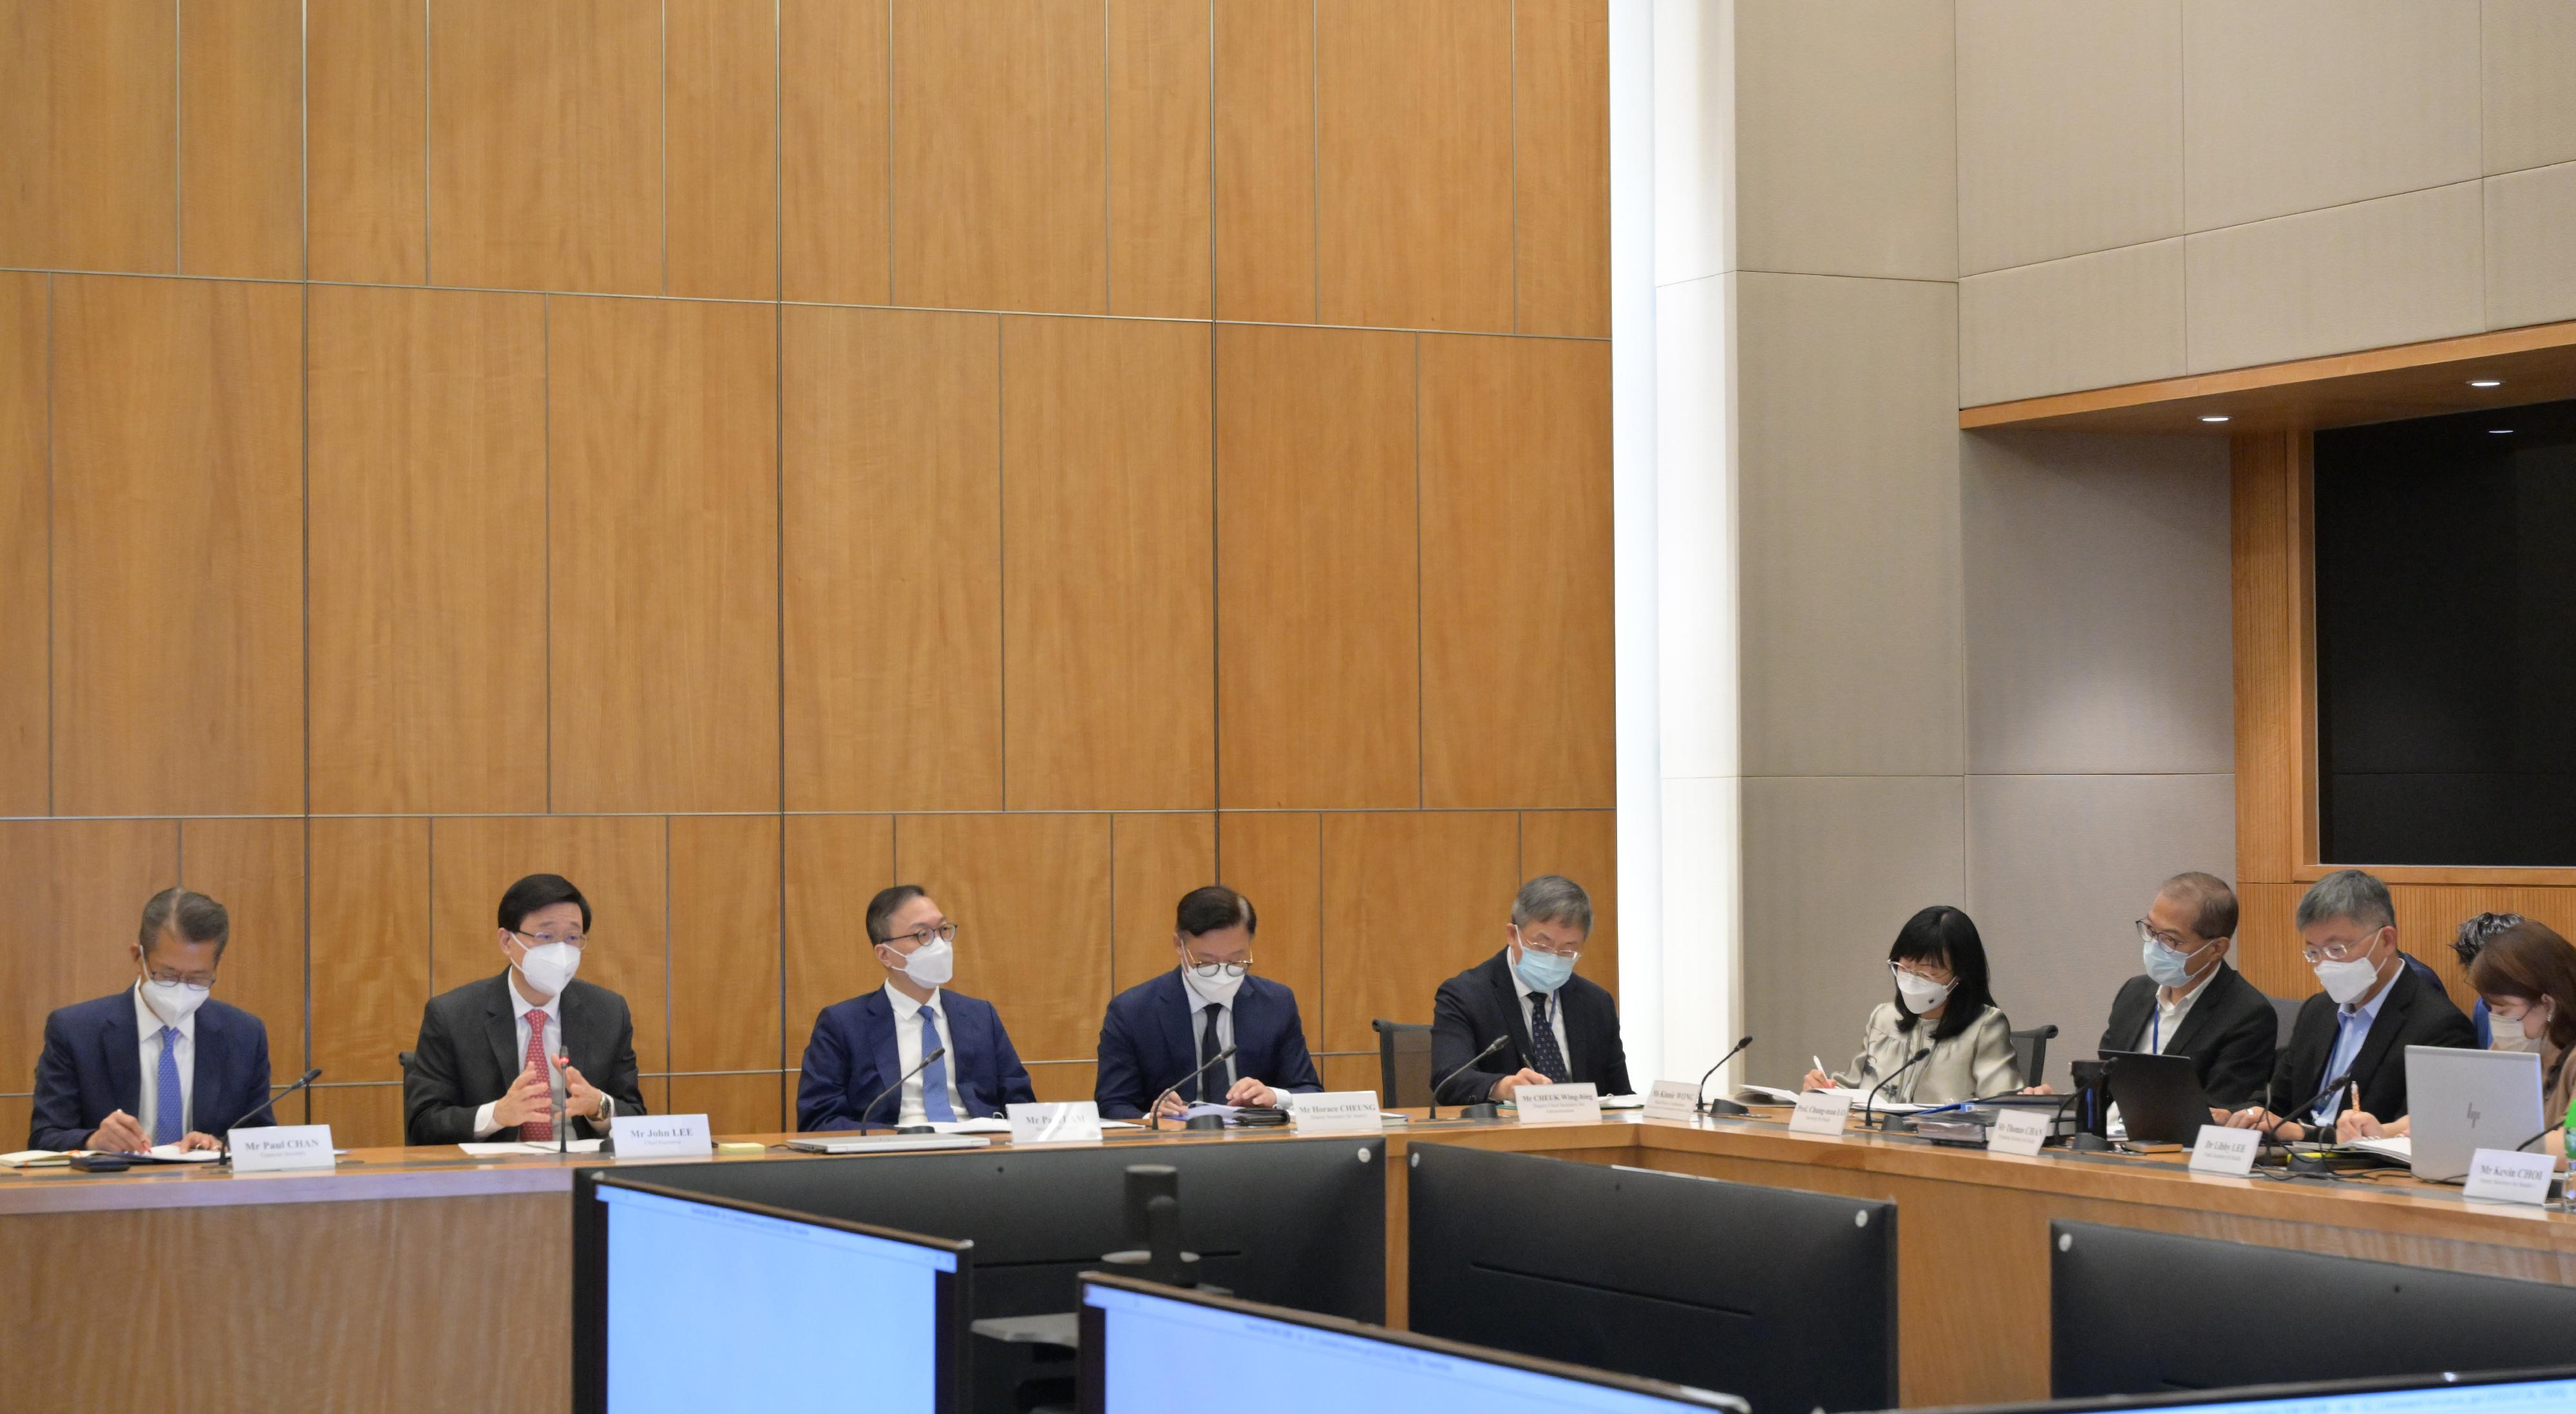 The Chief Executive, Mr John Lee (second left), chaired the first meeting of the Anti-epidemic Steering Committee in the current-term Government yesterday (July 27).